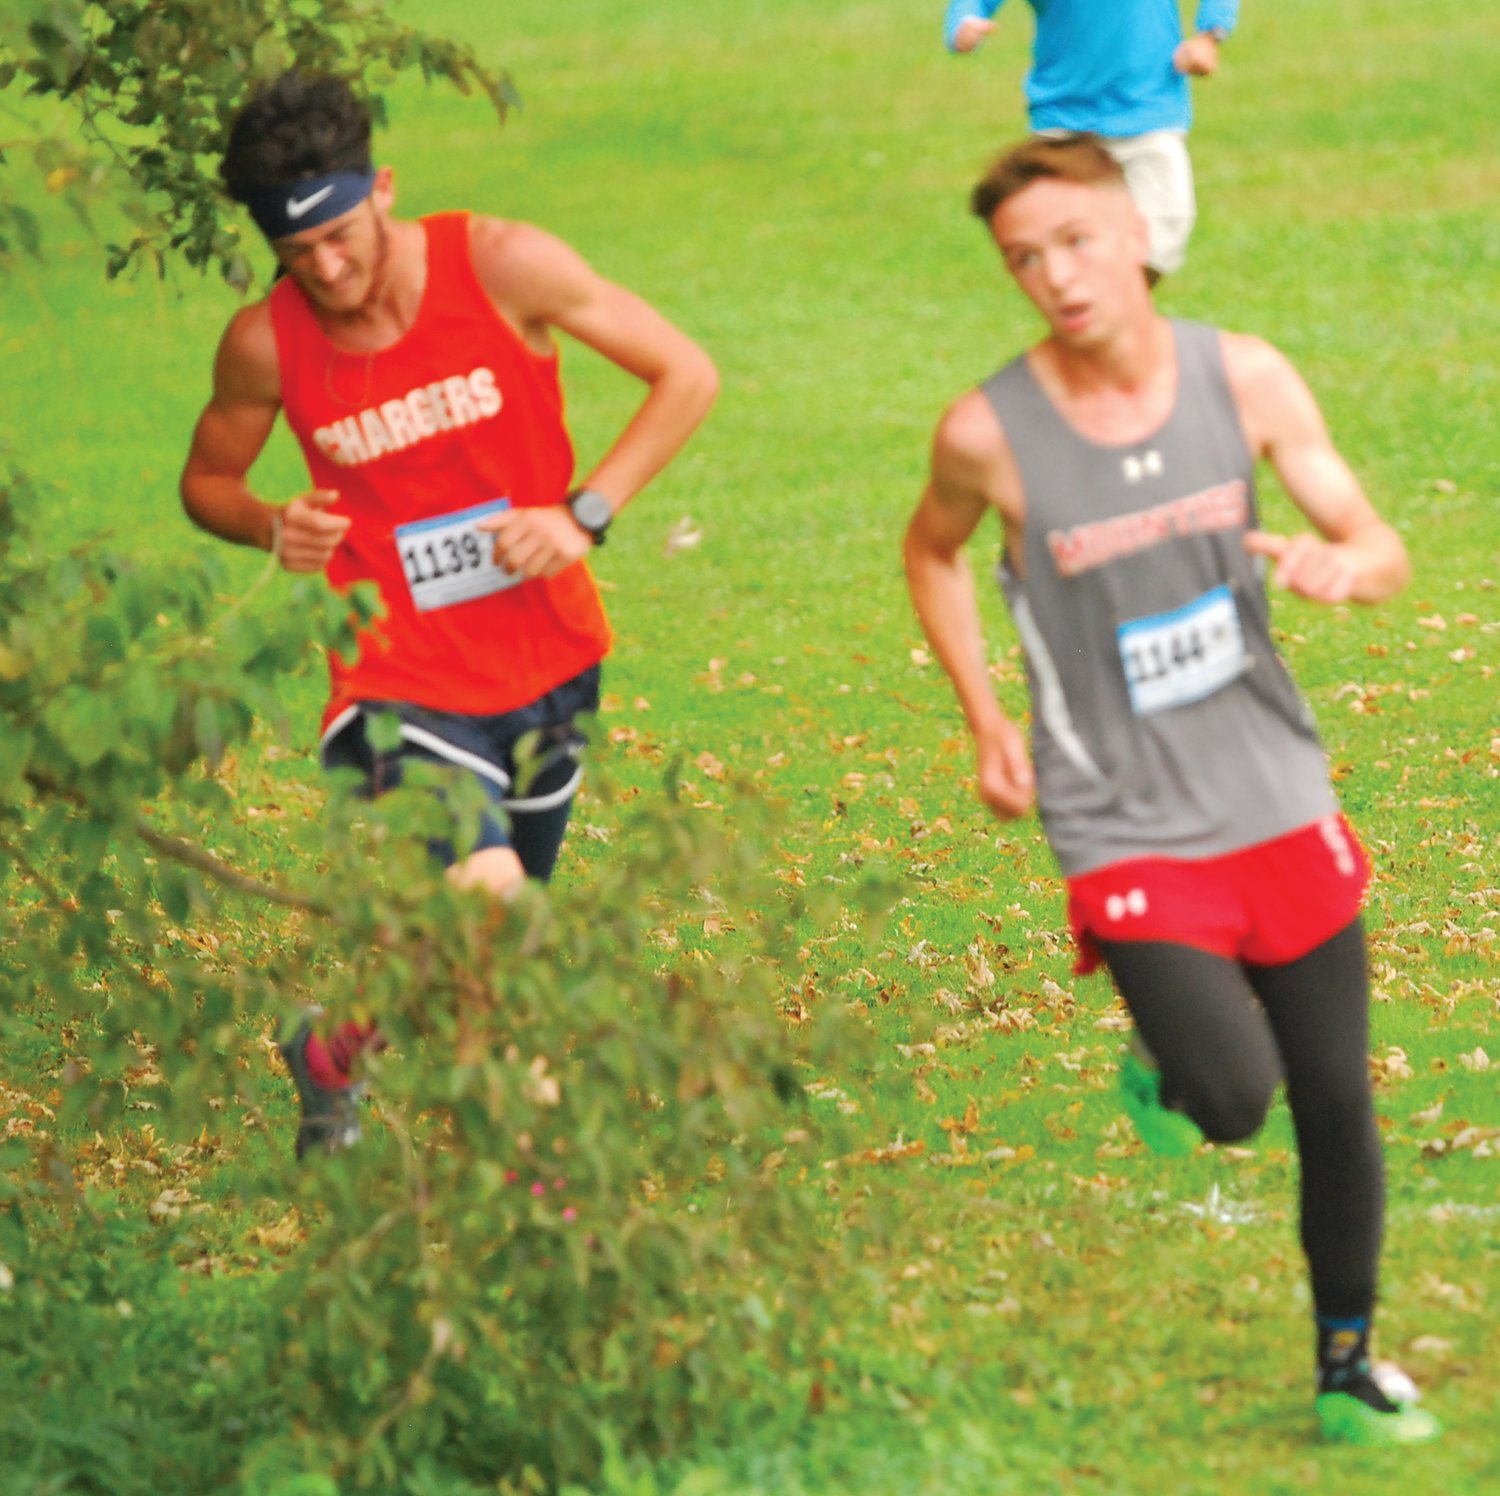 Southmont's Mason Cass and North Montgomery's Elijah McCartney both broke 17 minutes on their way to a second and third place finish respectively.